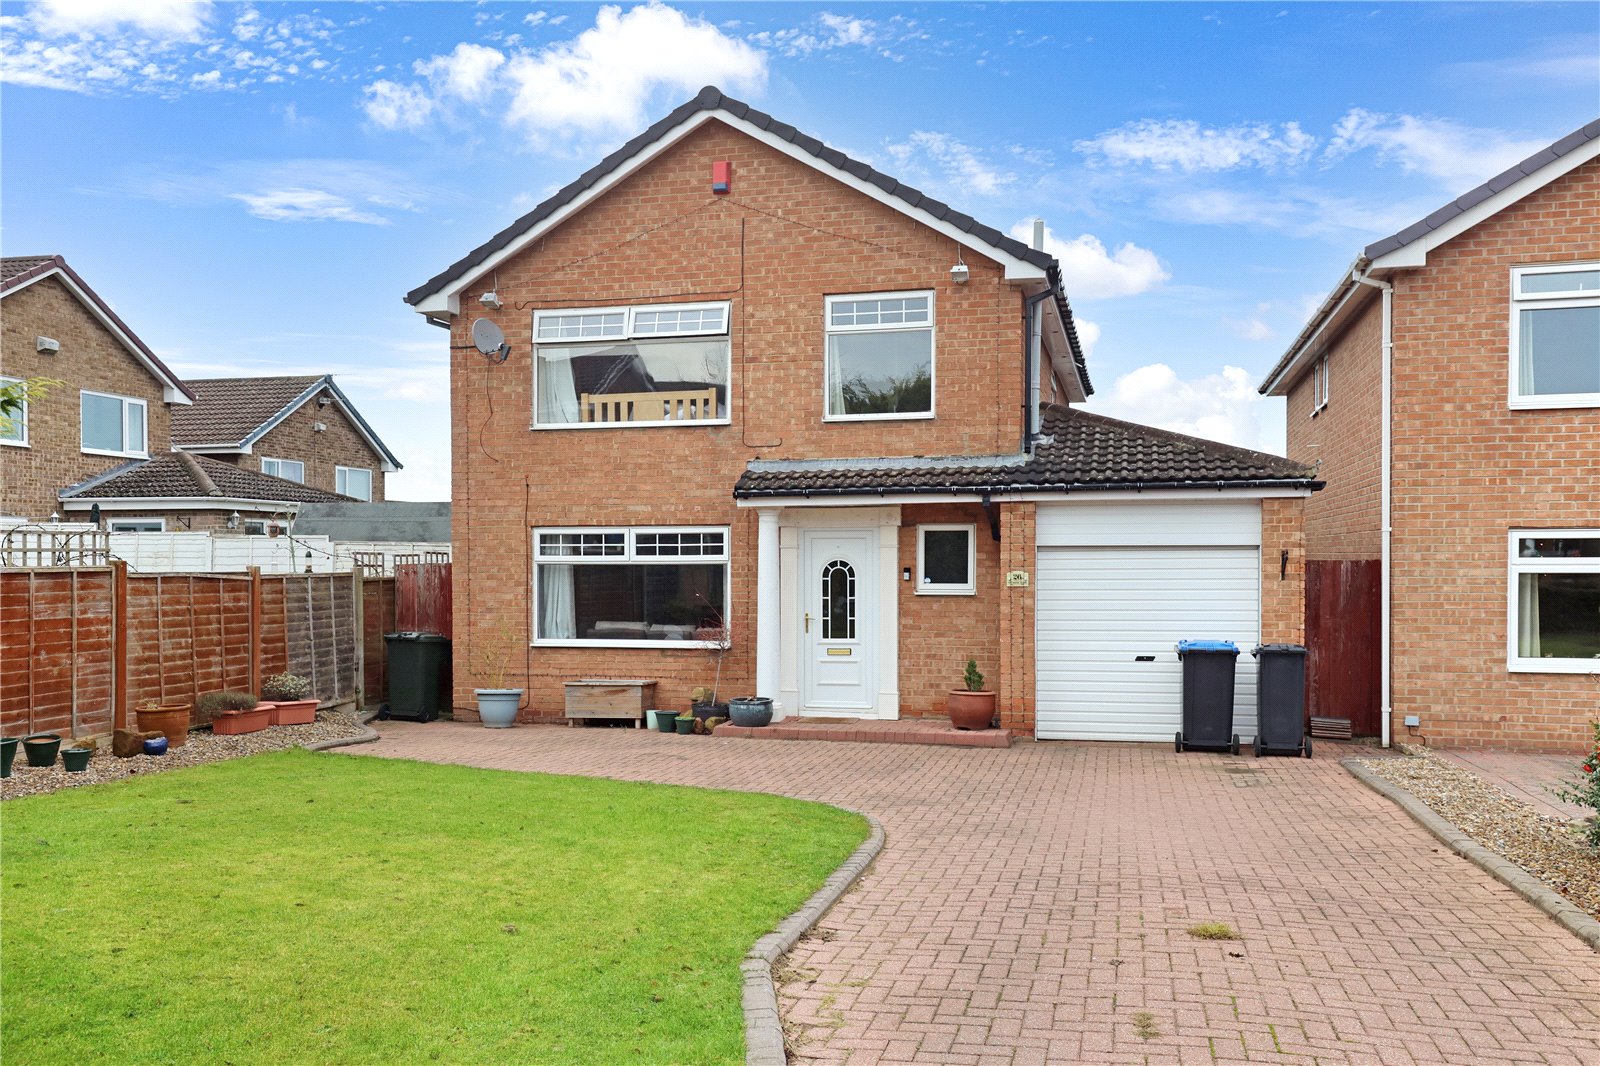 4 bed house for sale in Levington Wynd, Nunthorpe  - Property Image 1